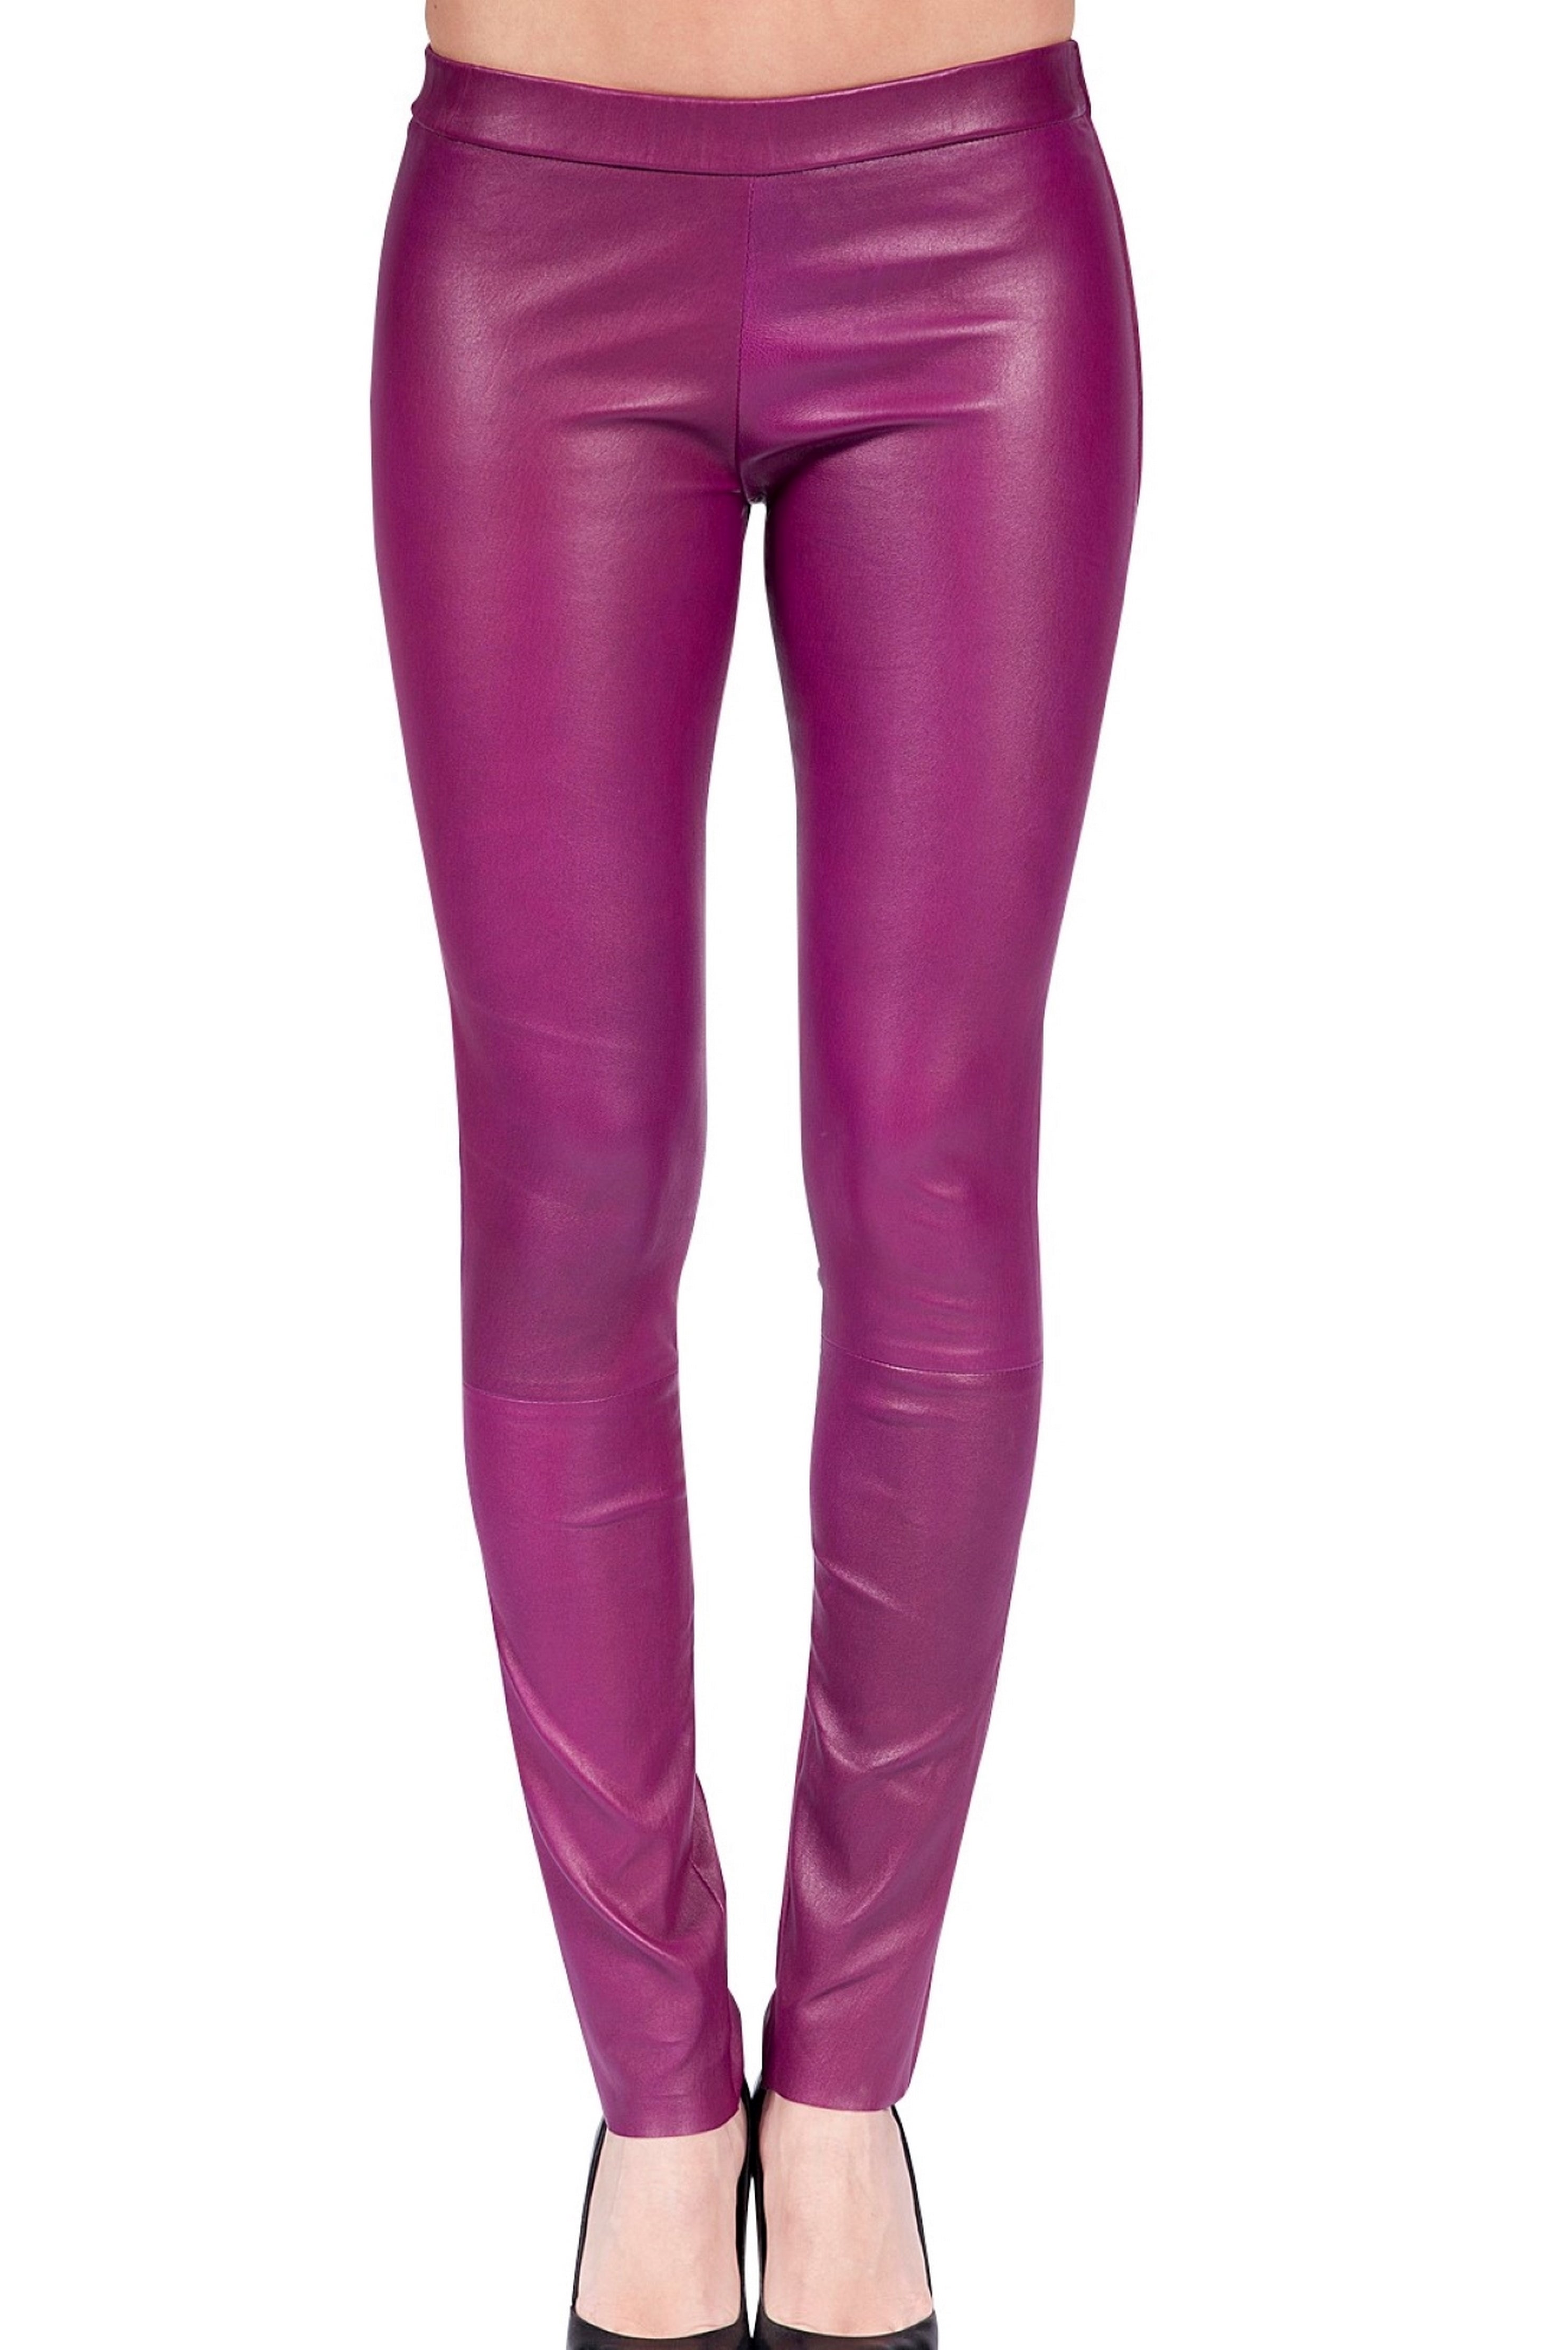 Leggings For Women Wholesale Distributors  International Society of  Precision Agriculture